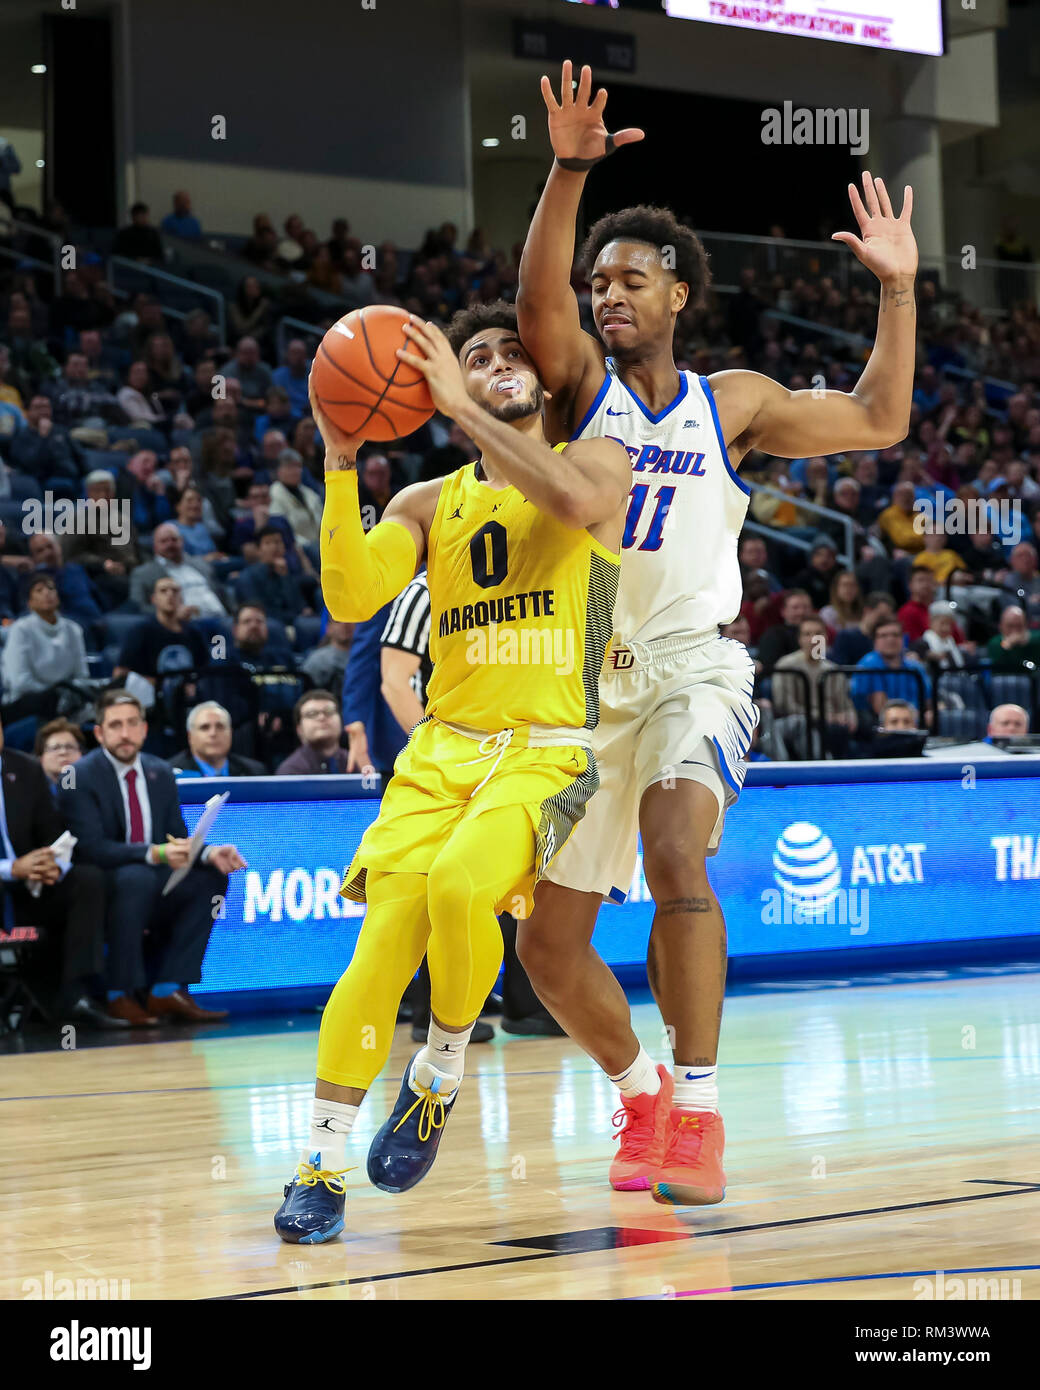 Chicago, USA. 12th Feb 2019. Marquette Golden Eagles guard Markus Howard (0) is fouled by DePaul Blue Demons guard Eli Cain (11) on a drive to the basket during NCAA basketball game between the Marquette Golden Eagles and the DePaul University Blue Demons at Wintrust Arena in Chicago IL. Gary E. Duncan Sr/CSM Credit: Cal Sport Media/Alamy Live News Stock Photo